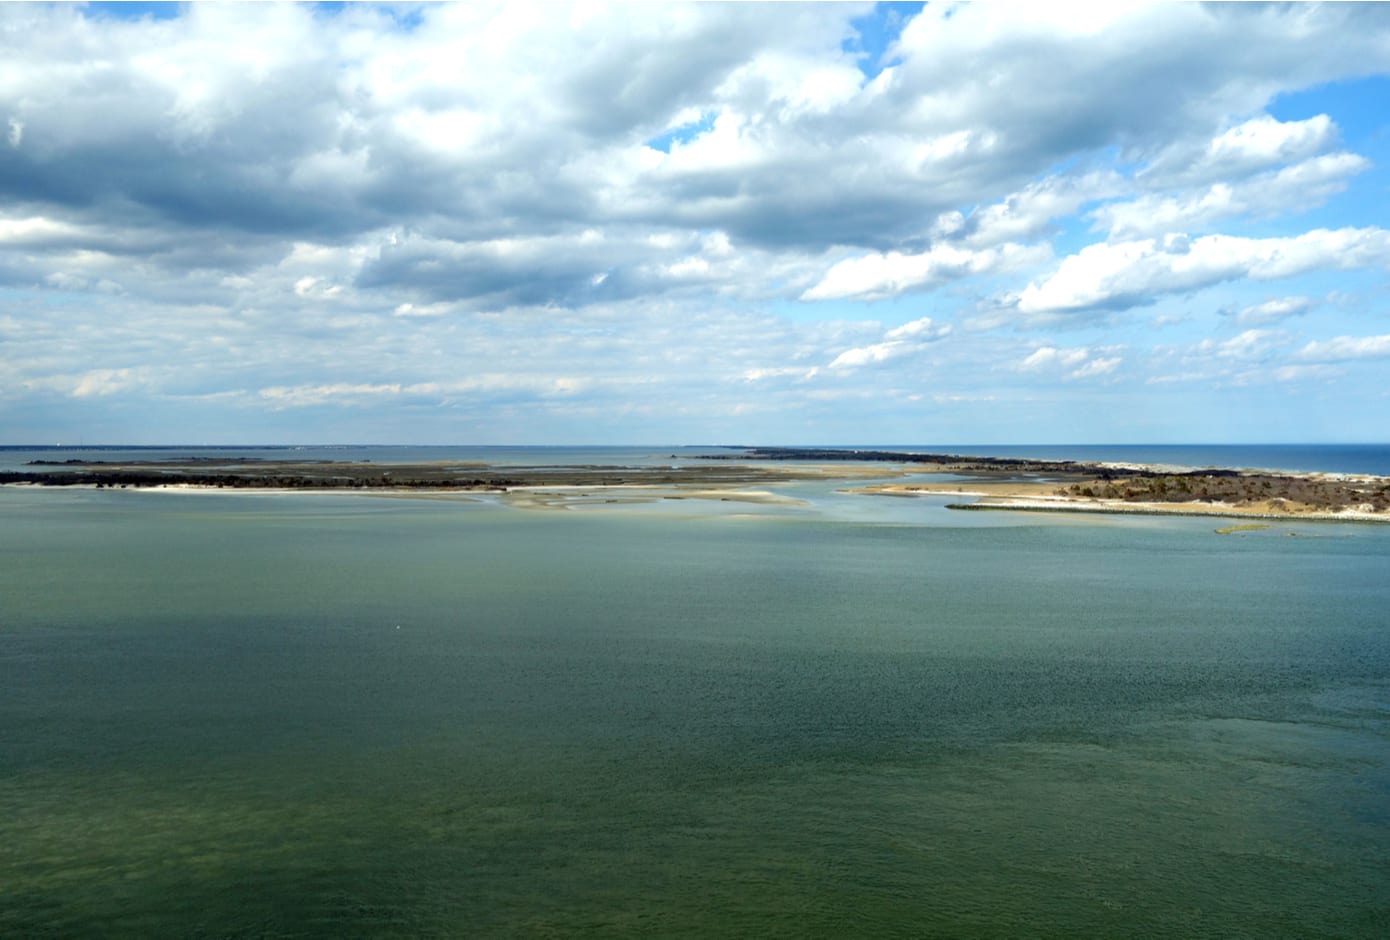 View of the Barnegat State Park located on Long Beach Island, New Jersey.